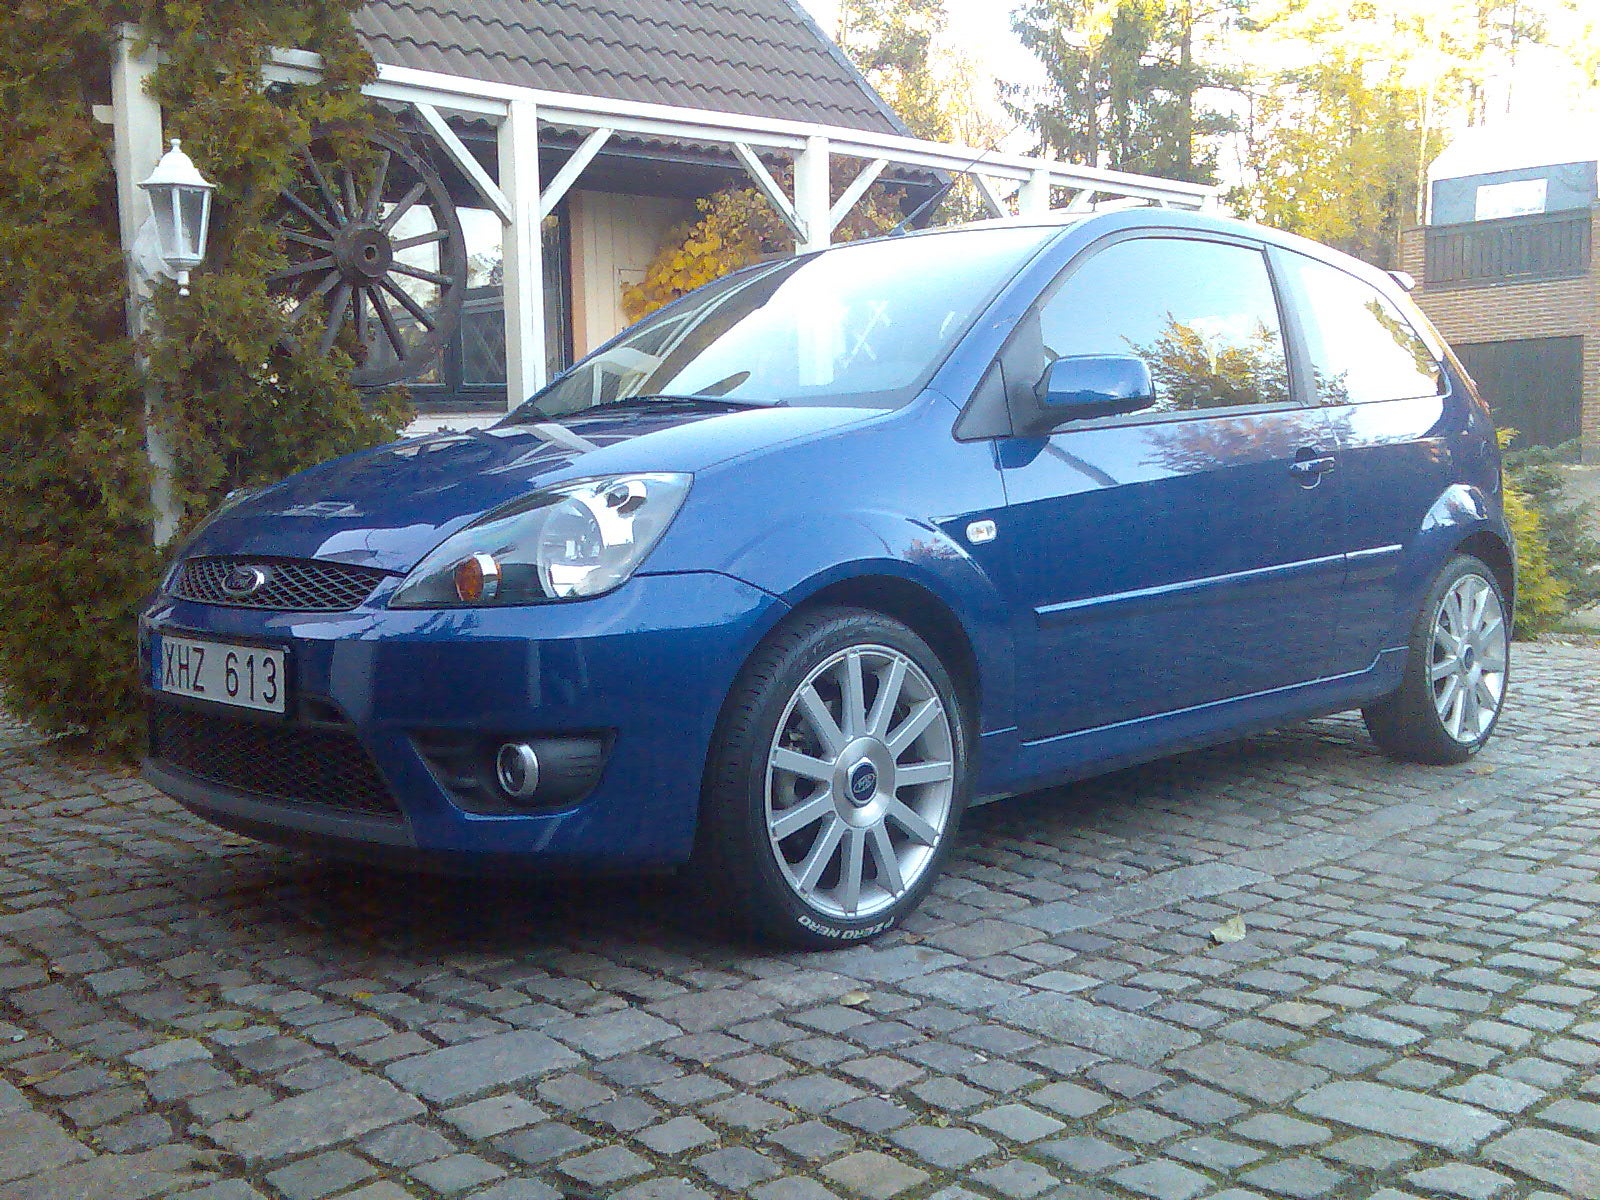 2006 Ford fiesta st reviews #7